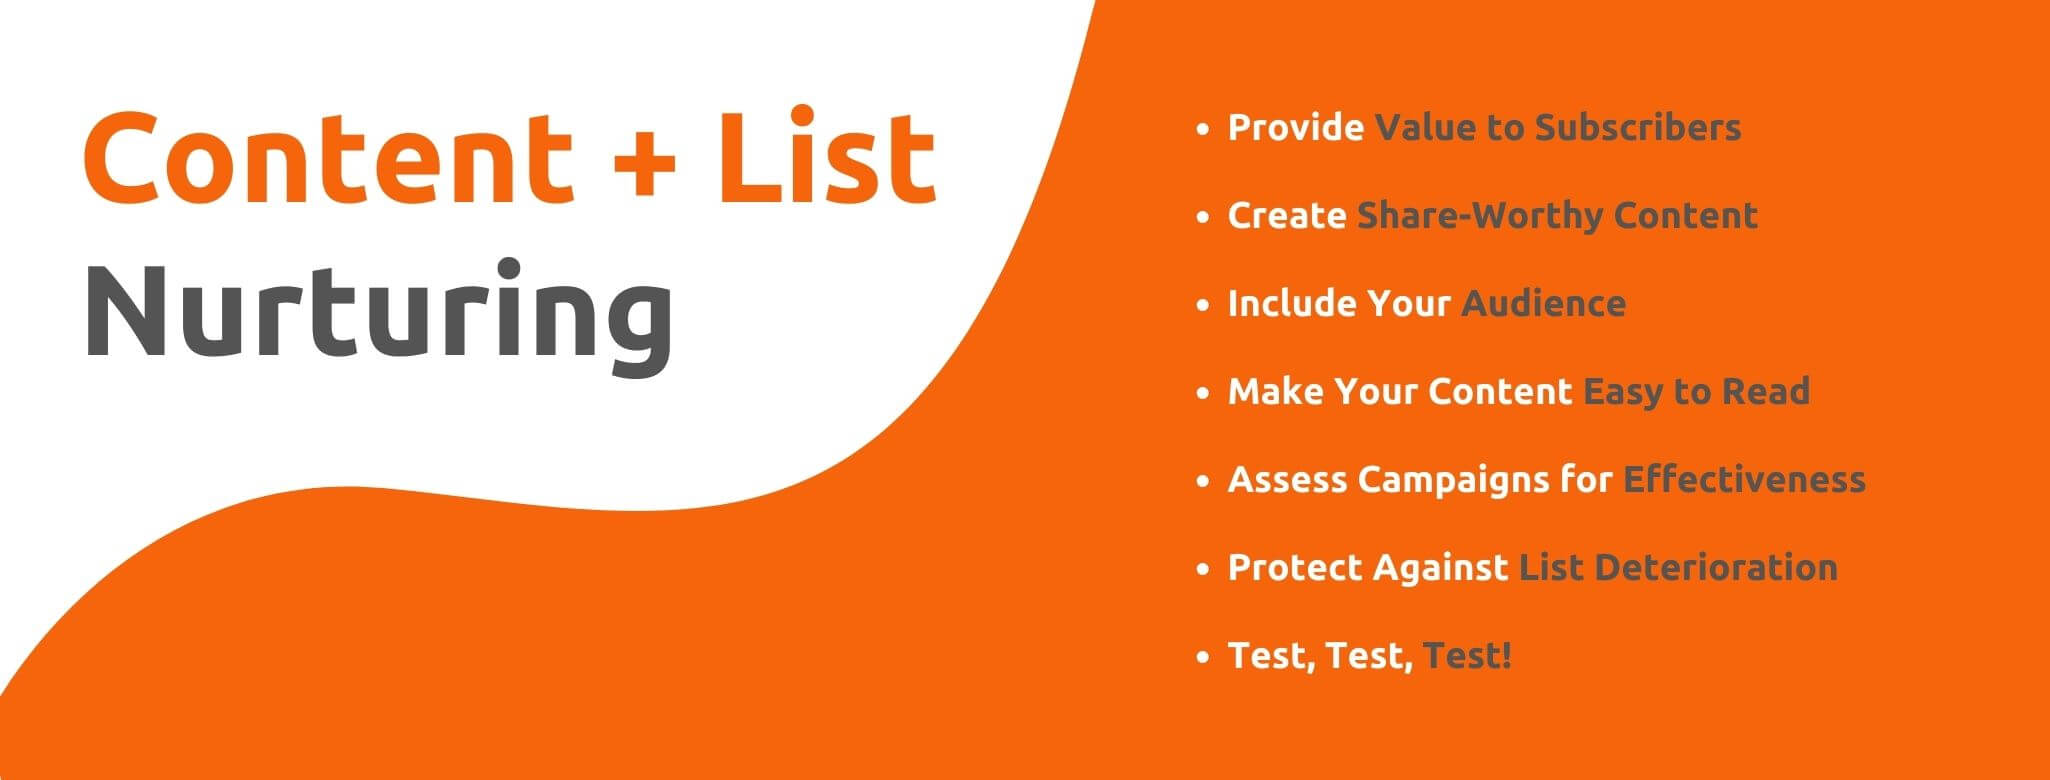 Content + List Nurturing - Email Marketing: Your Definitive Guide to List Building - Replyco